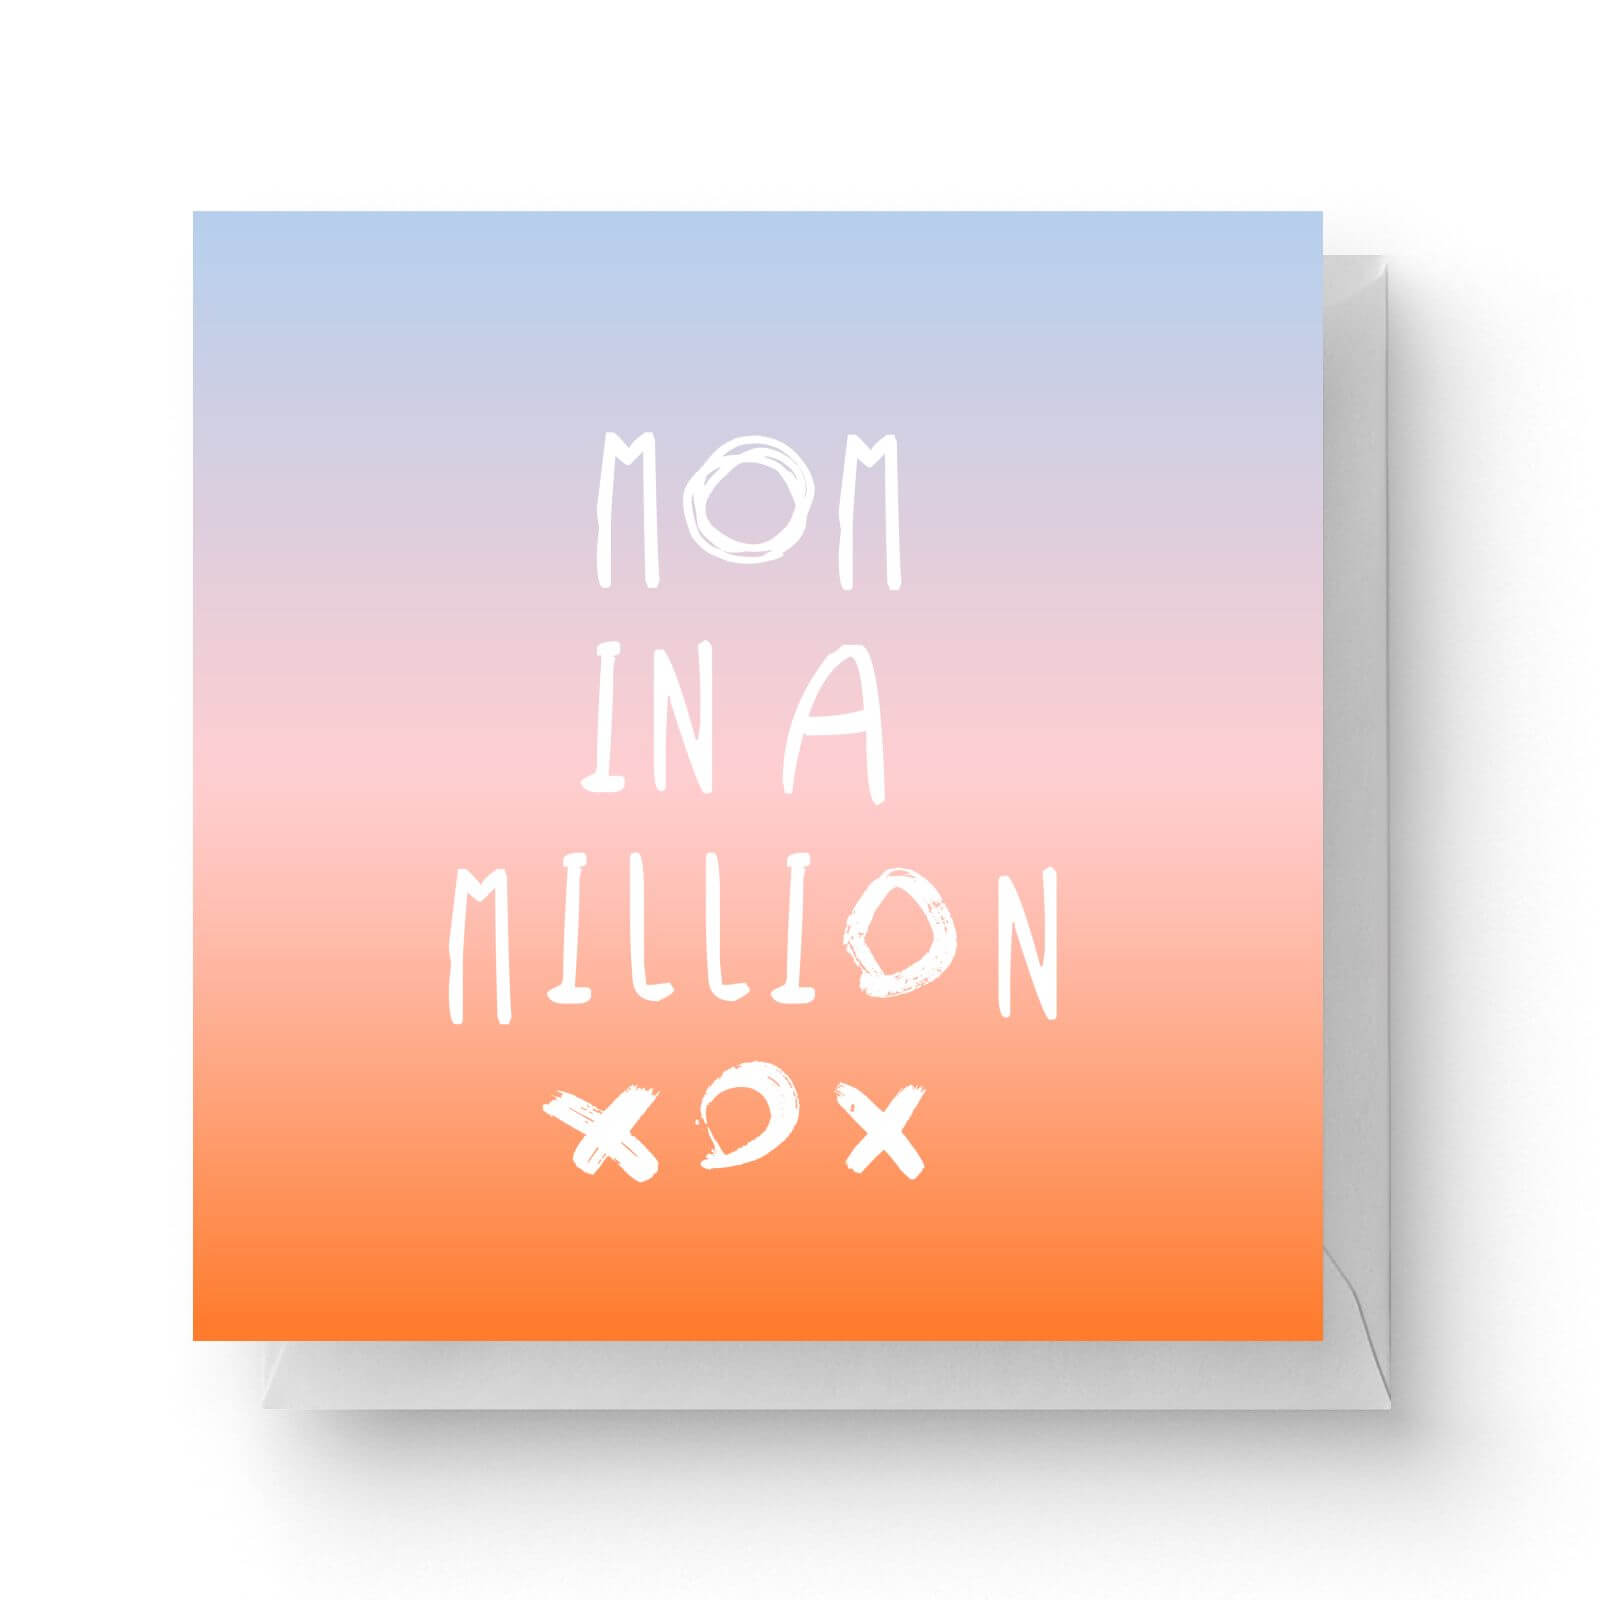 Mom In A Million XOX Square Greetings Card (14.8cm x 14.8cm)